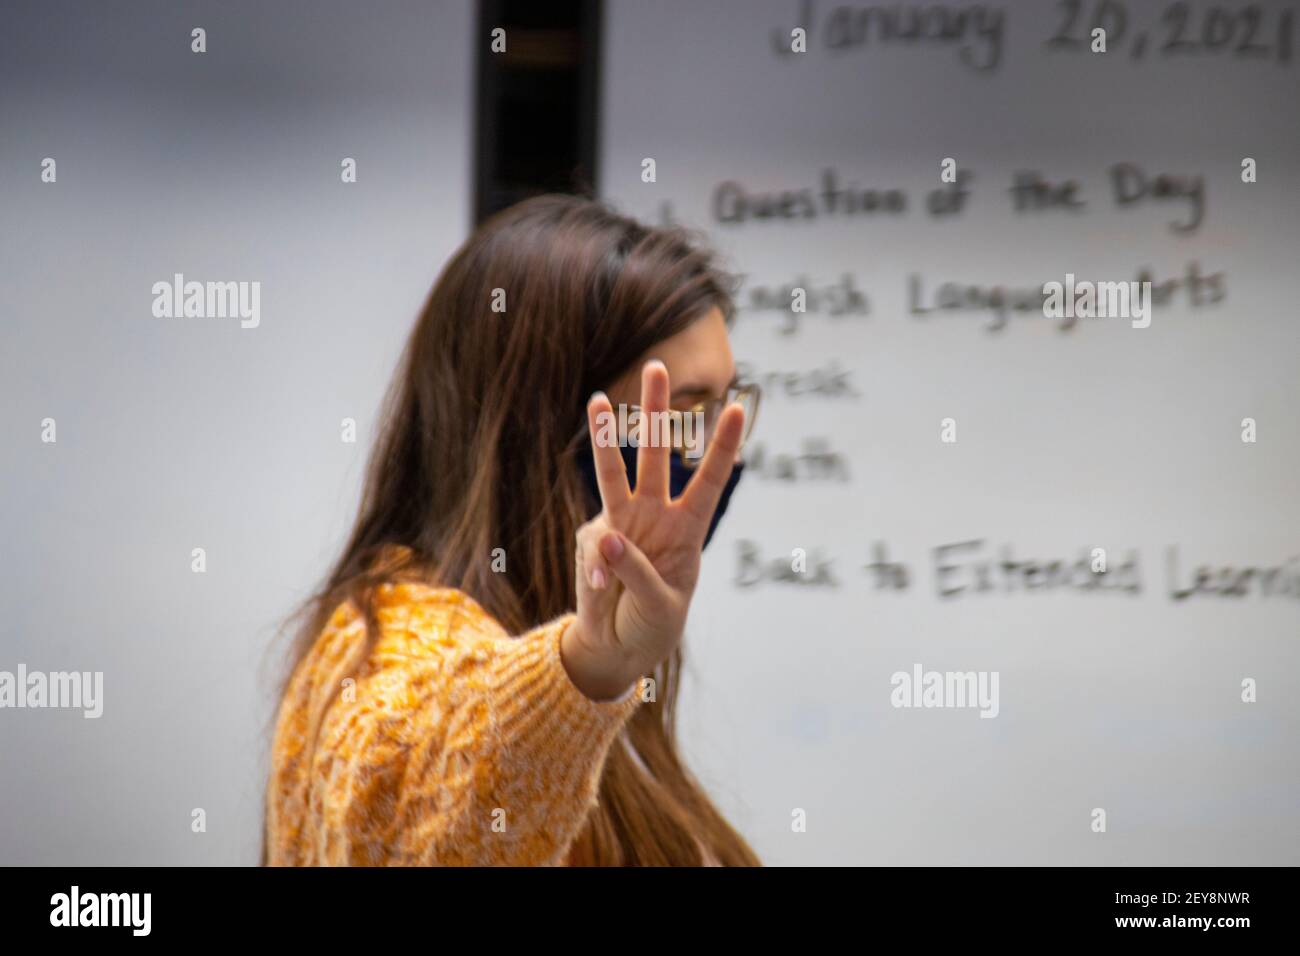 Holding up three fingers, a California elementary school teacher explains three syllable words to her third grade language arts students. Note face mask due to the coronavirus pandemic. Stock Photo